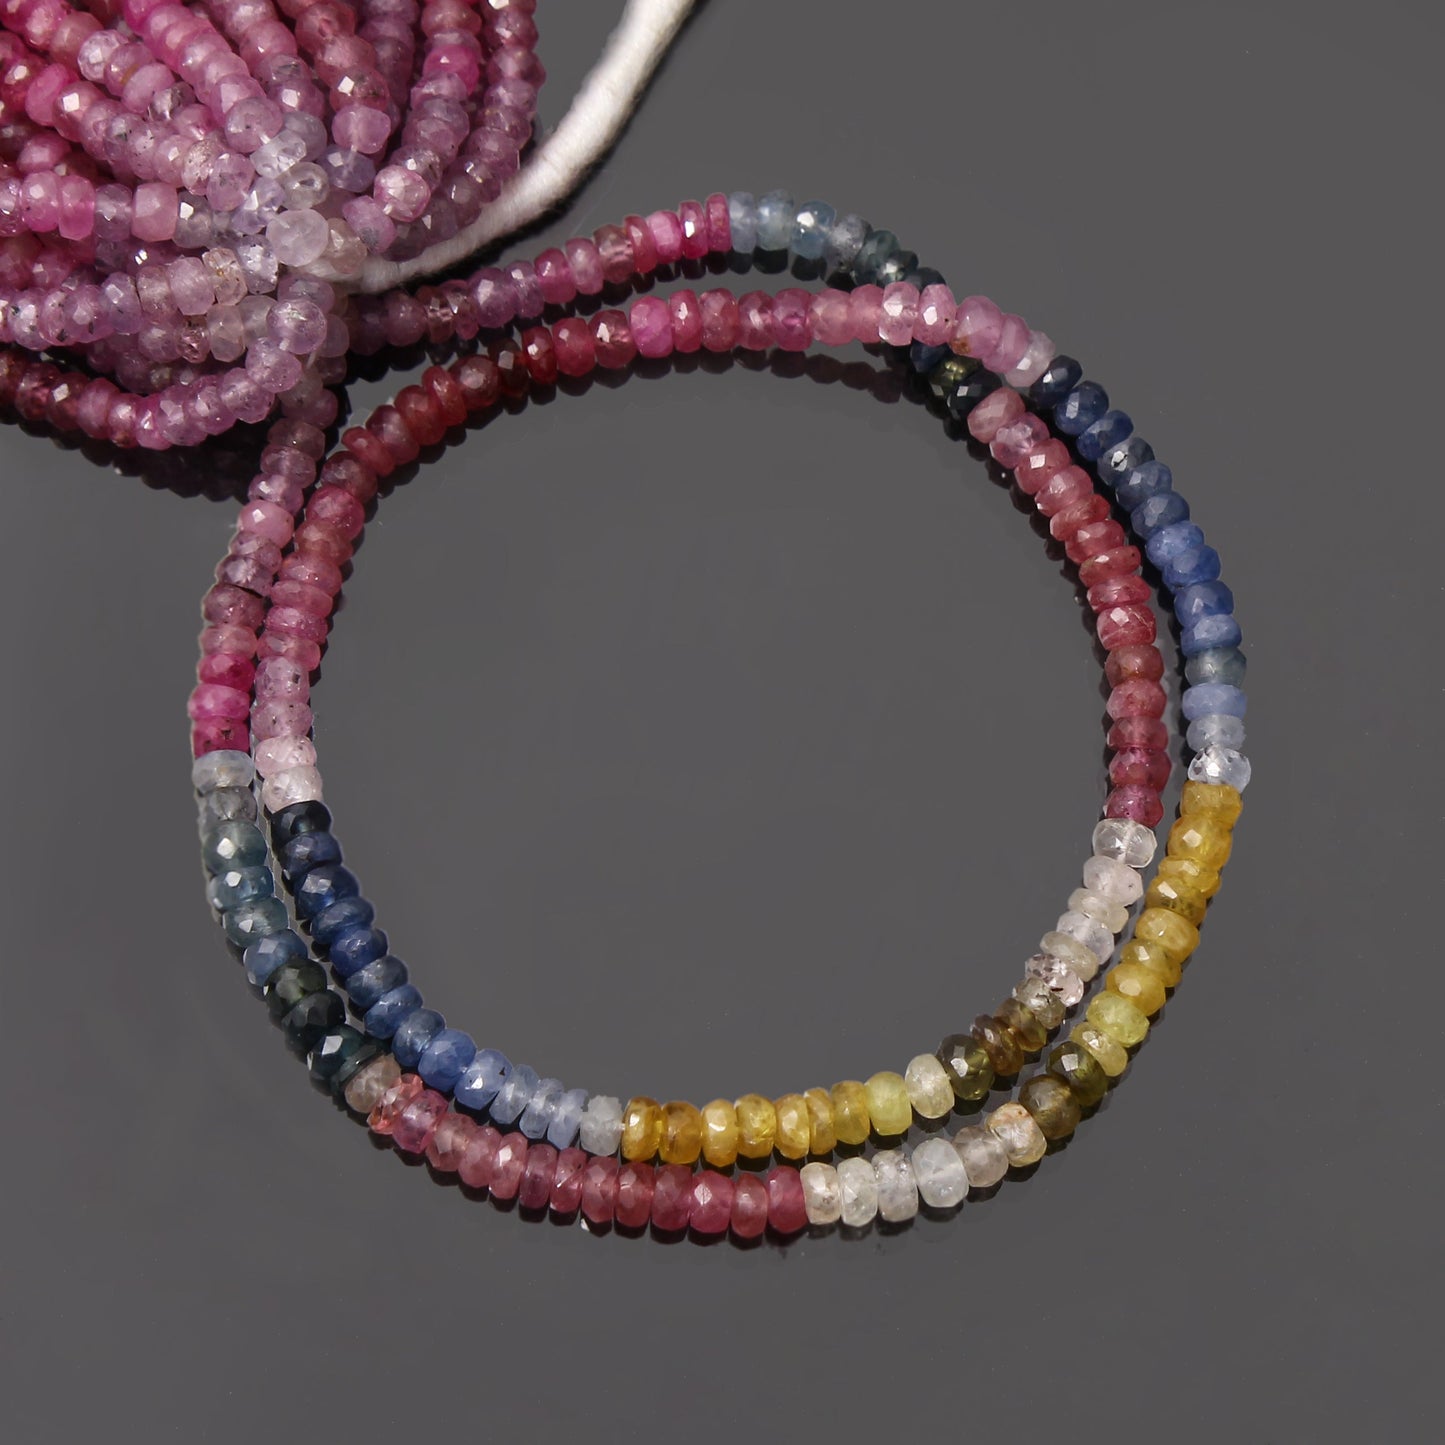 Multi Sapphire Faceted Rondelle Beads 3.5-4 mm, Precious Beads For Necklace, 8 Inches GemsRush